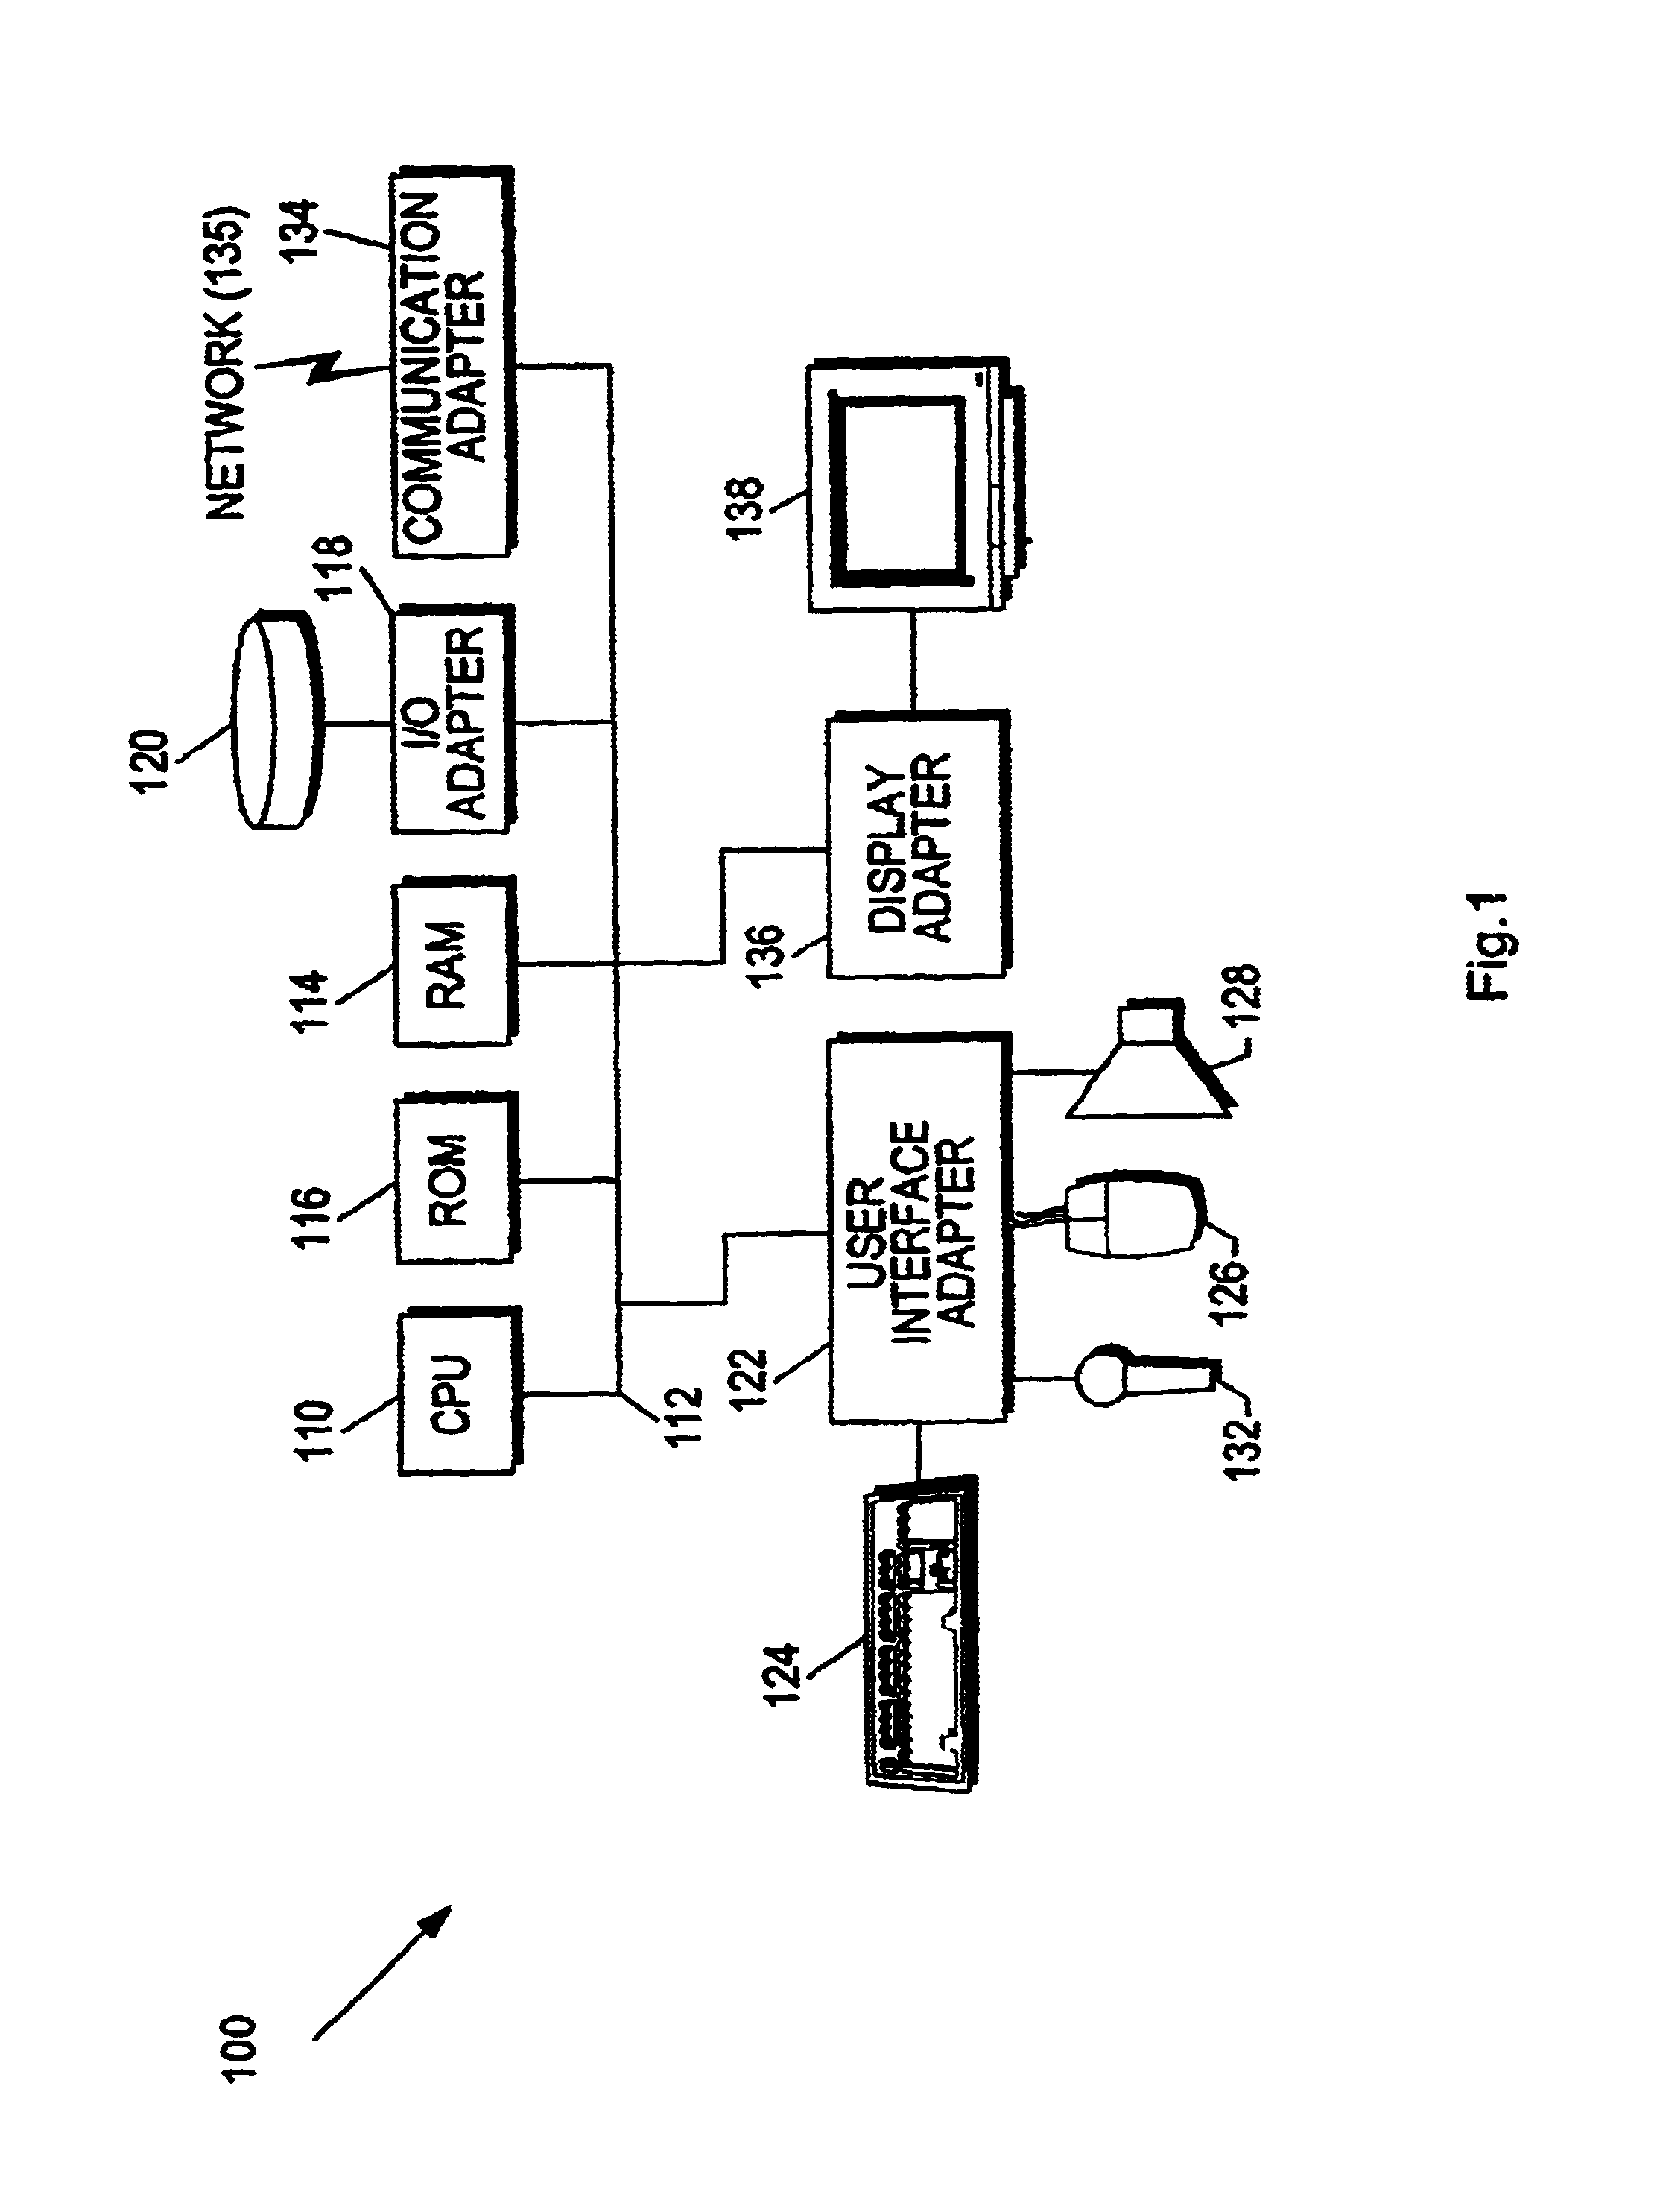 Management interface between a core telecommunication system and a local service provider